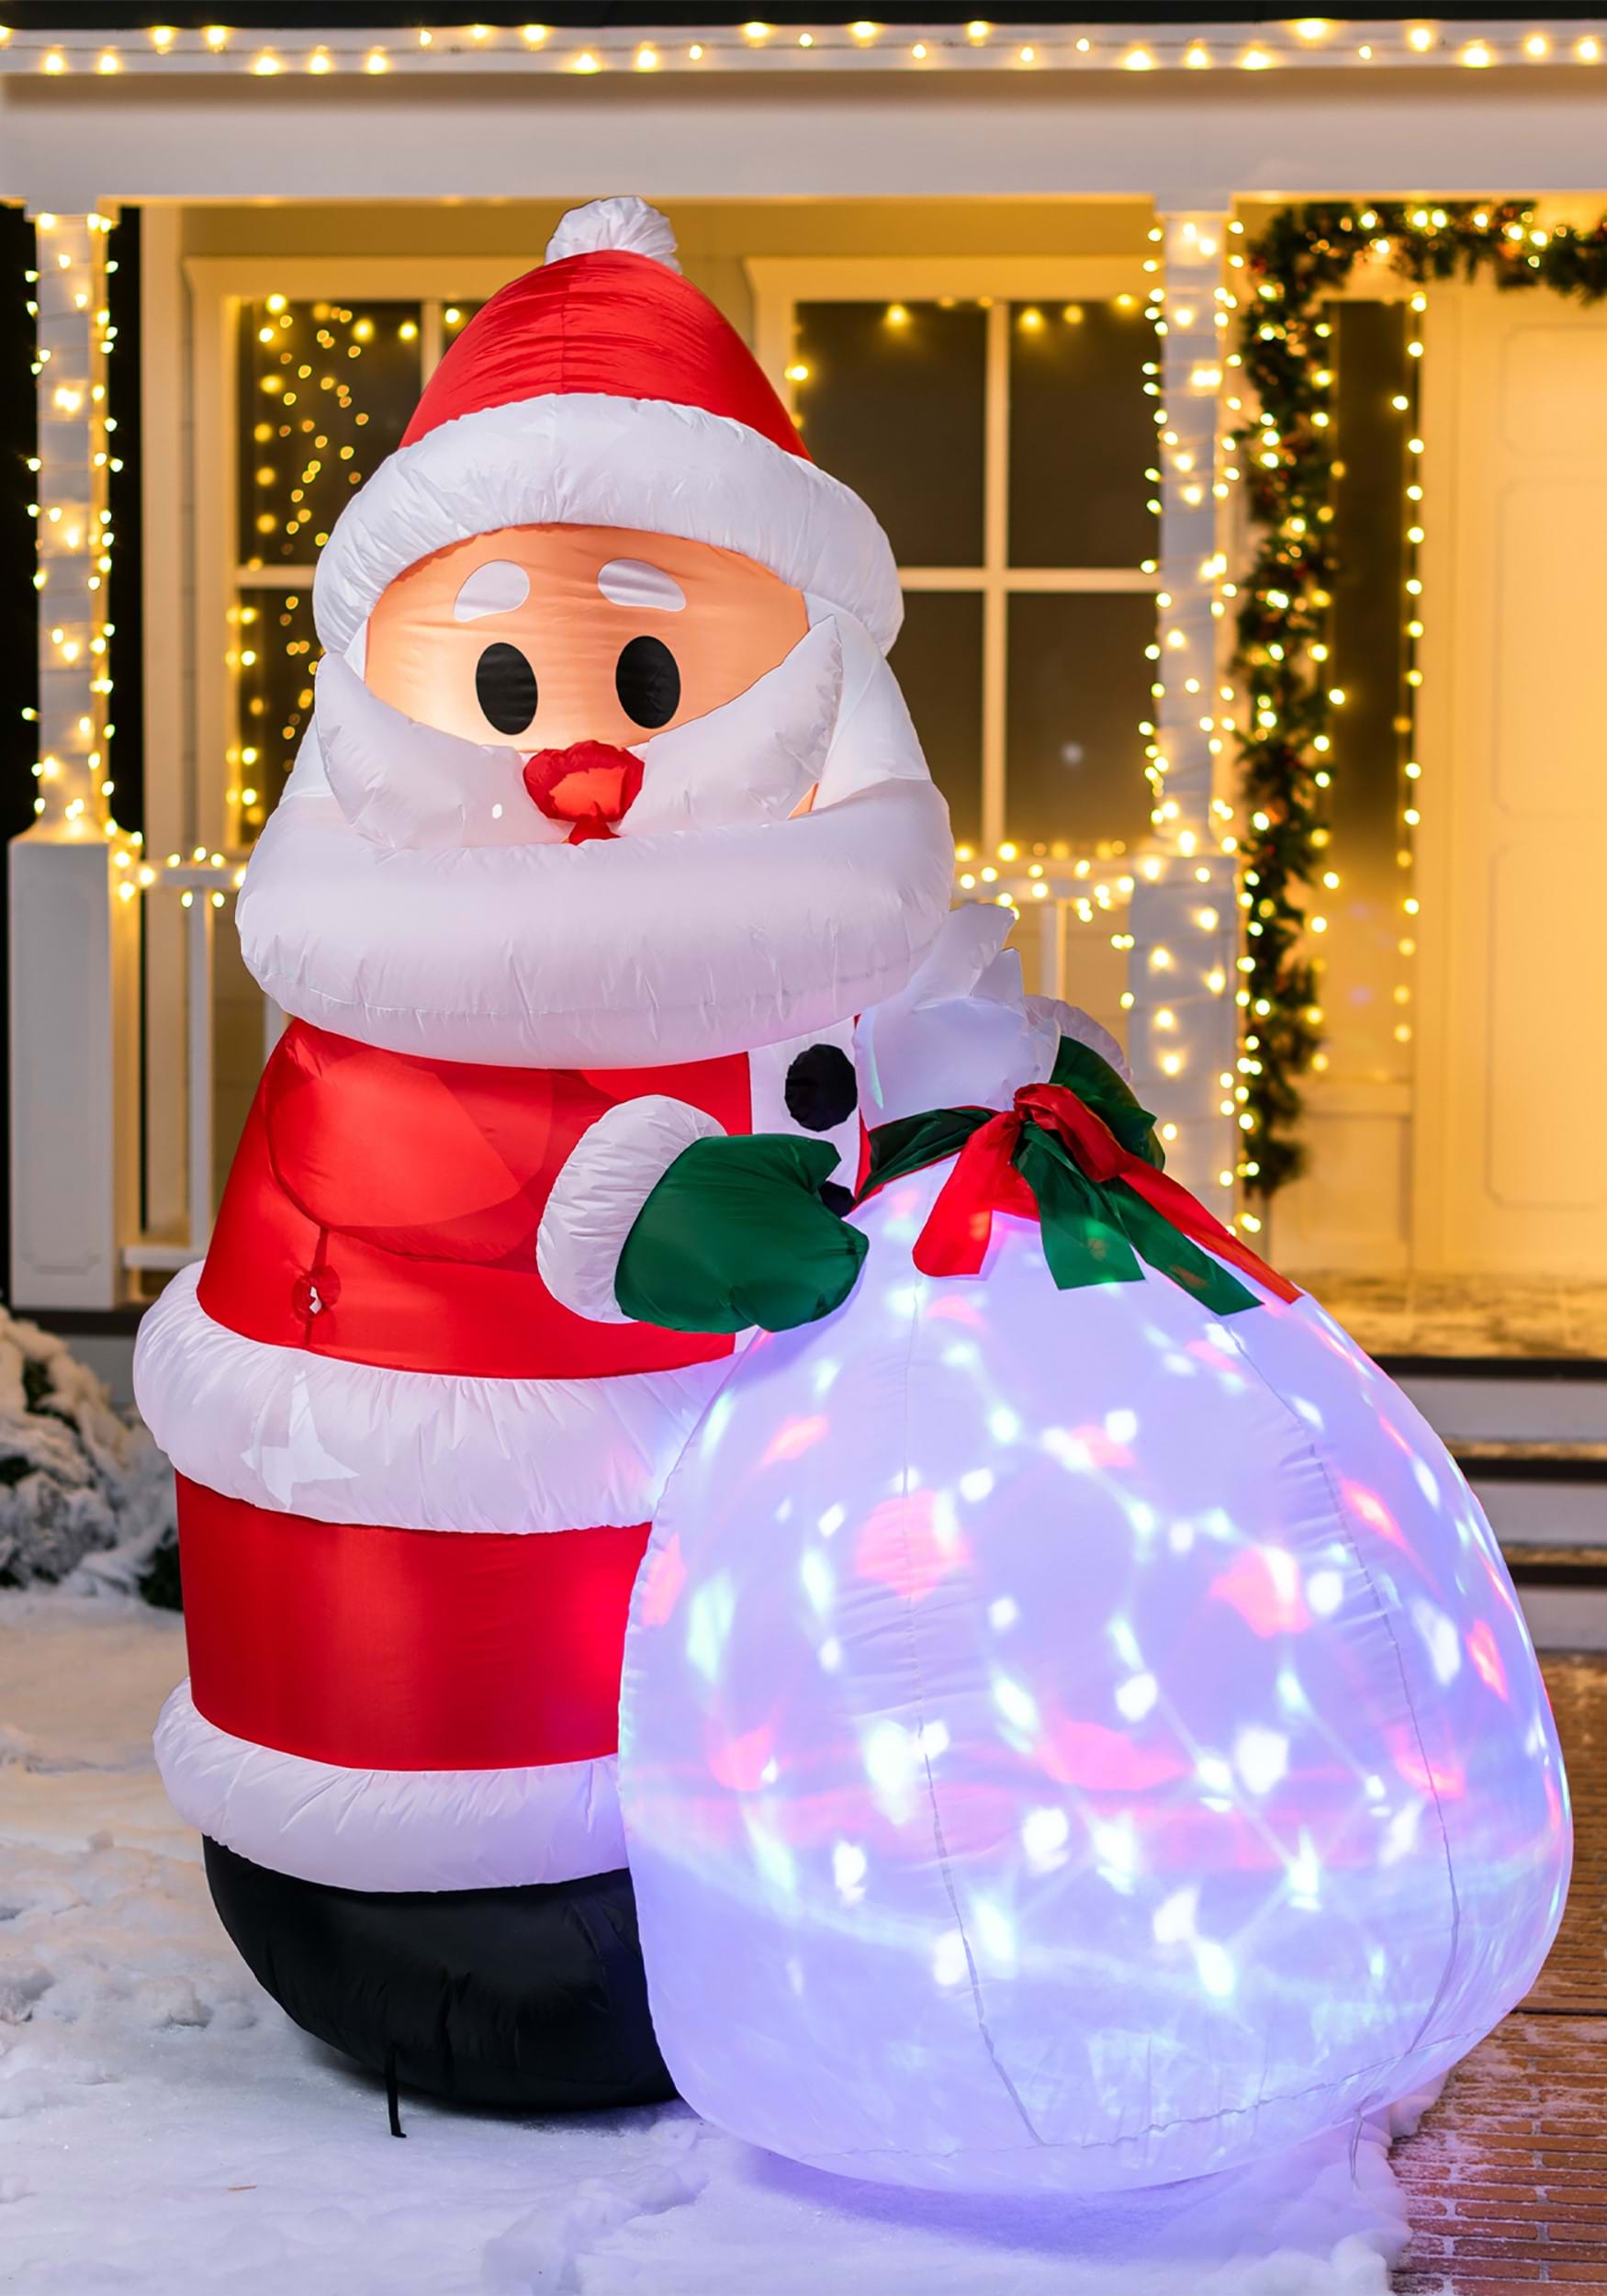 https://images.halloweencostumes.com/products/83920/1-1/7-9-ft-tall-projection-santa-gift-bag-inflatable-main.jpg